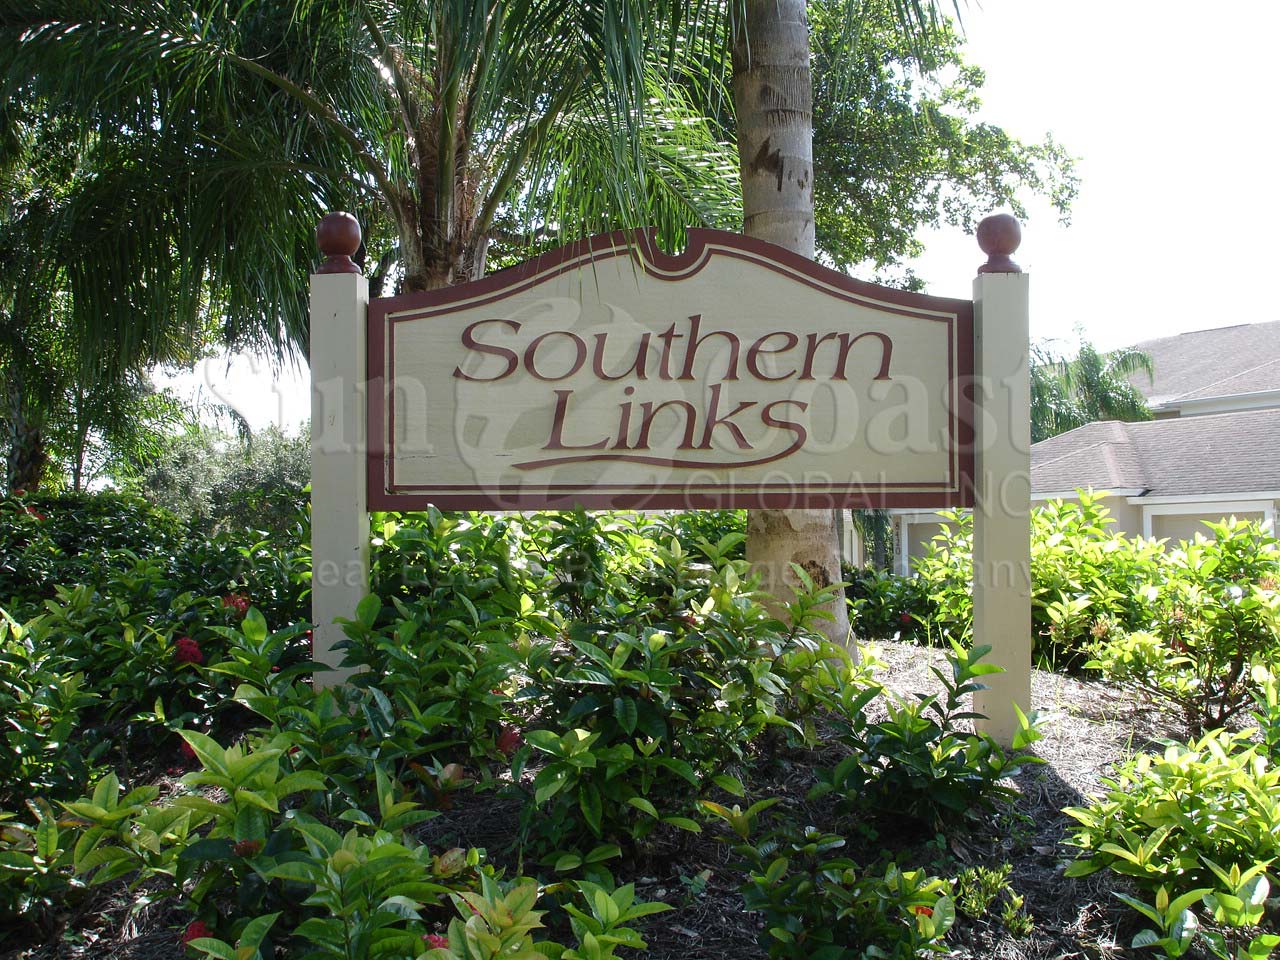 Southern Links signage